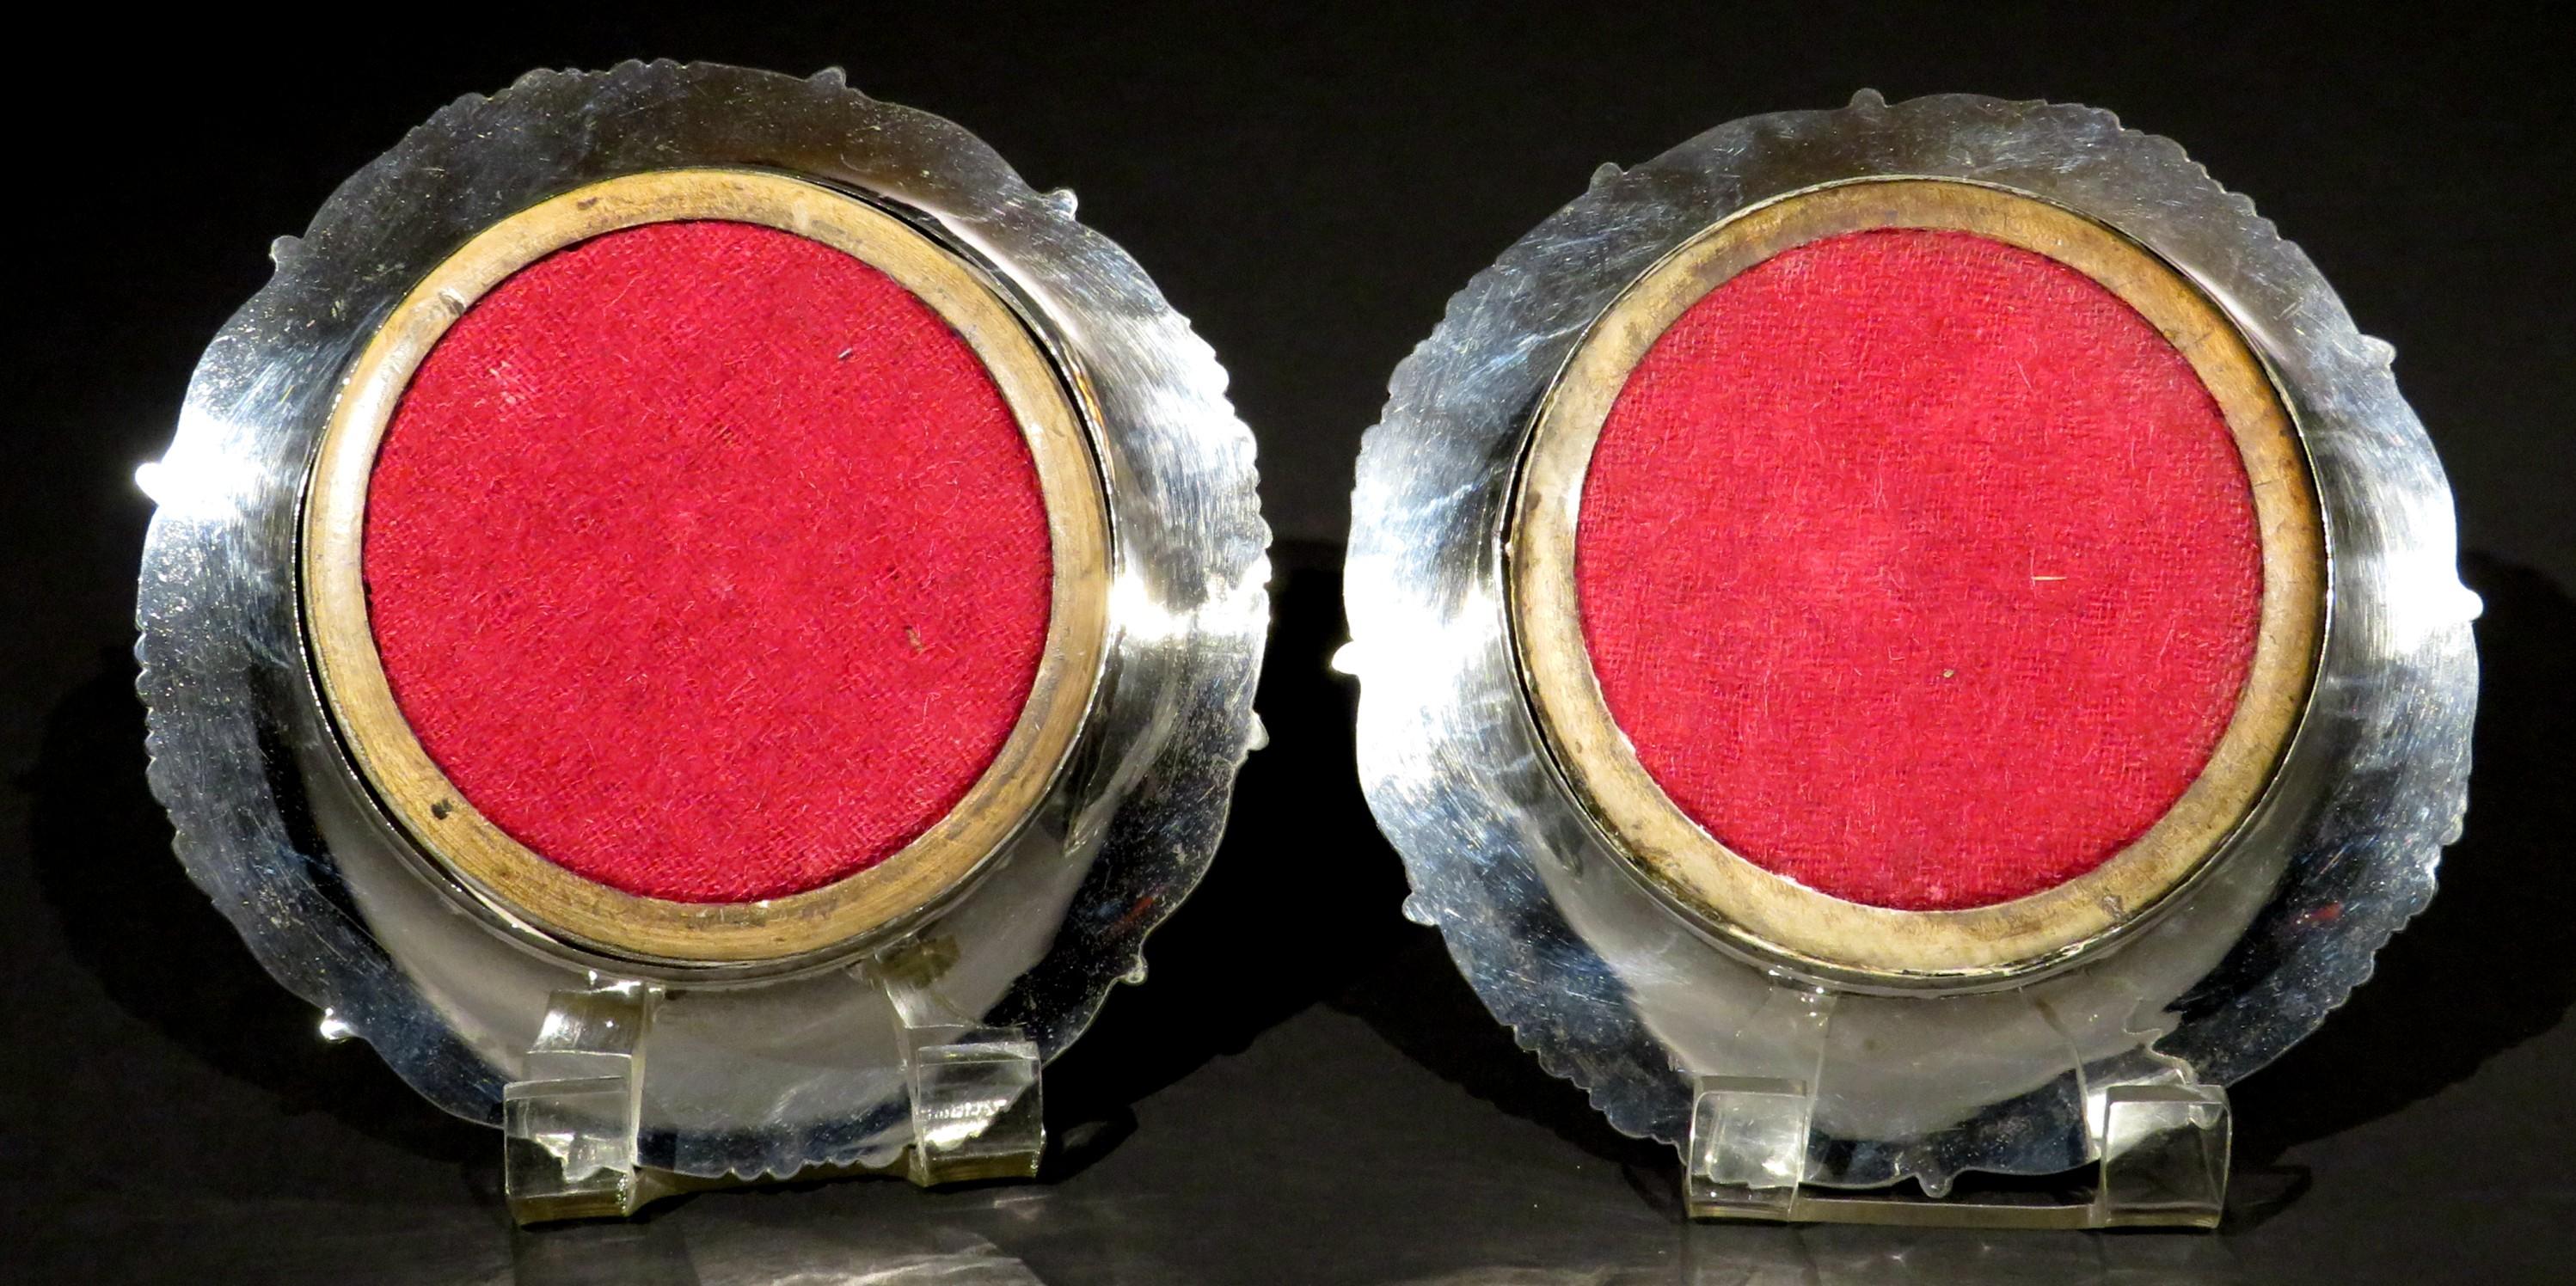 A very handsome pair of re-plated 'Old Sheffield Plate' wine or decanter slides / coasters, both showing rims decorated with shell & scroll cast motifs, rising from turned wood bases centered by plated roundels, their undersides lined with red